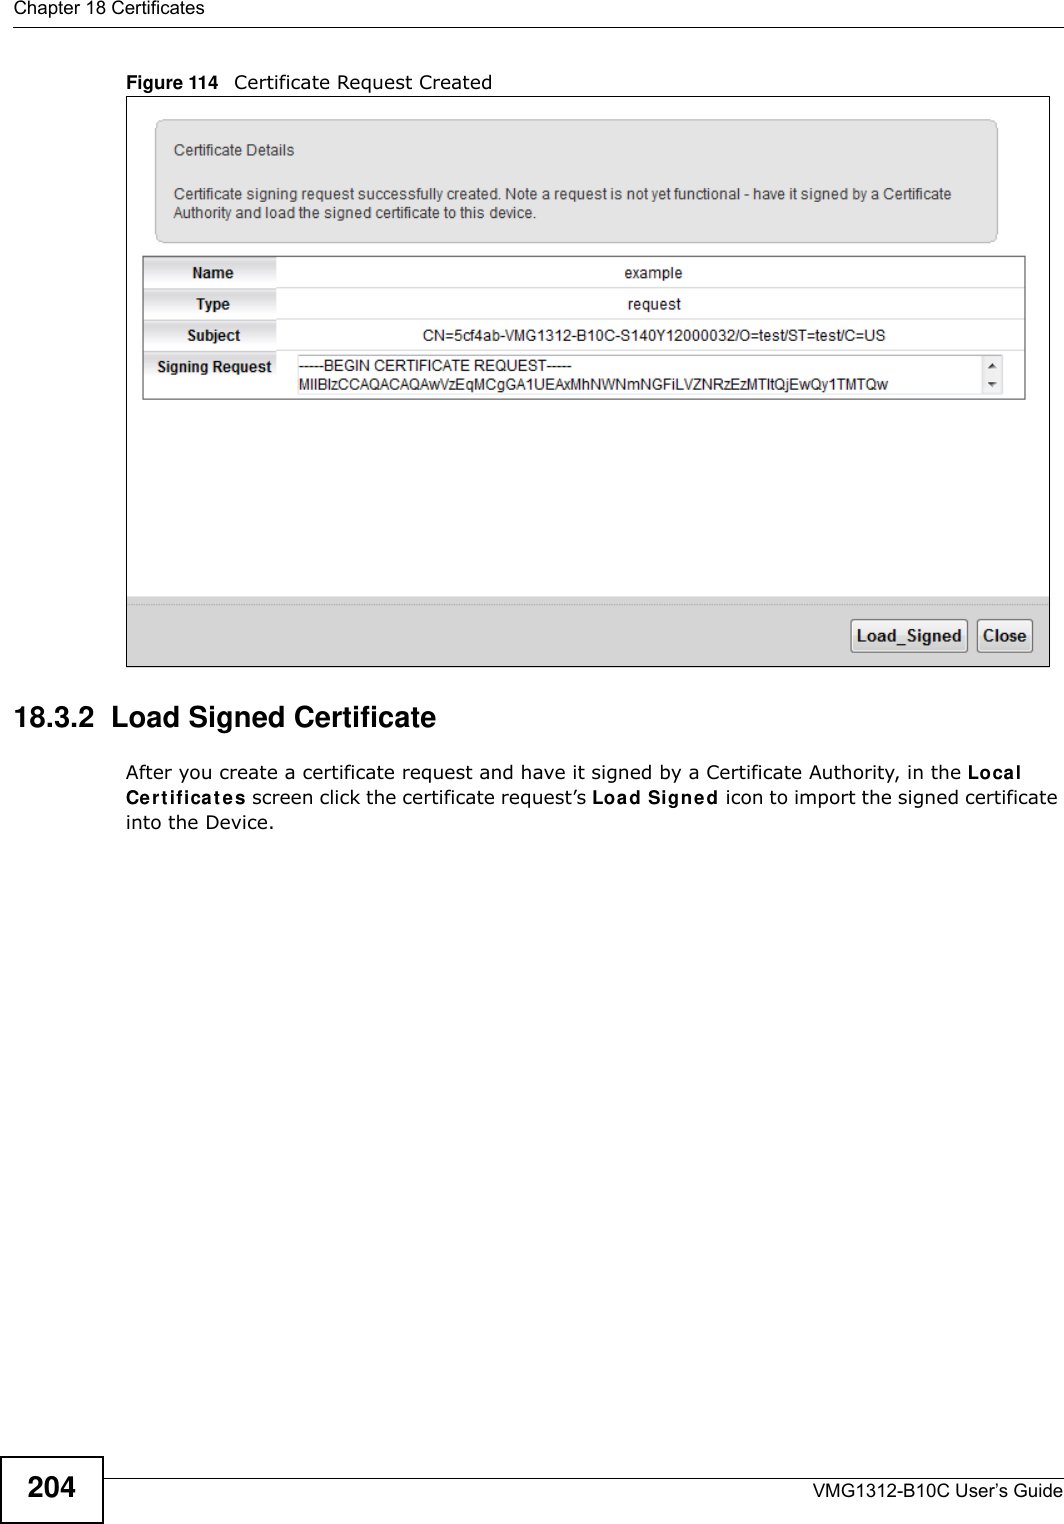 Chapter 18 CertificatesVMG1312-B10C User’s Guide204Figure 114   Certificate Request Created18.3.2  Load Signed Certificate After you create a certificate request and have it signed by a Certificate Authority, in the Local Ce r t ifica t e s screen click the certificate request’s Loa d Signed icon to import the signed certificate into the Device. 